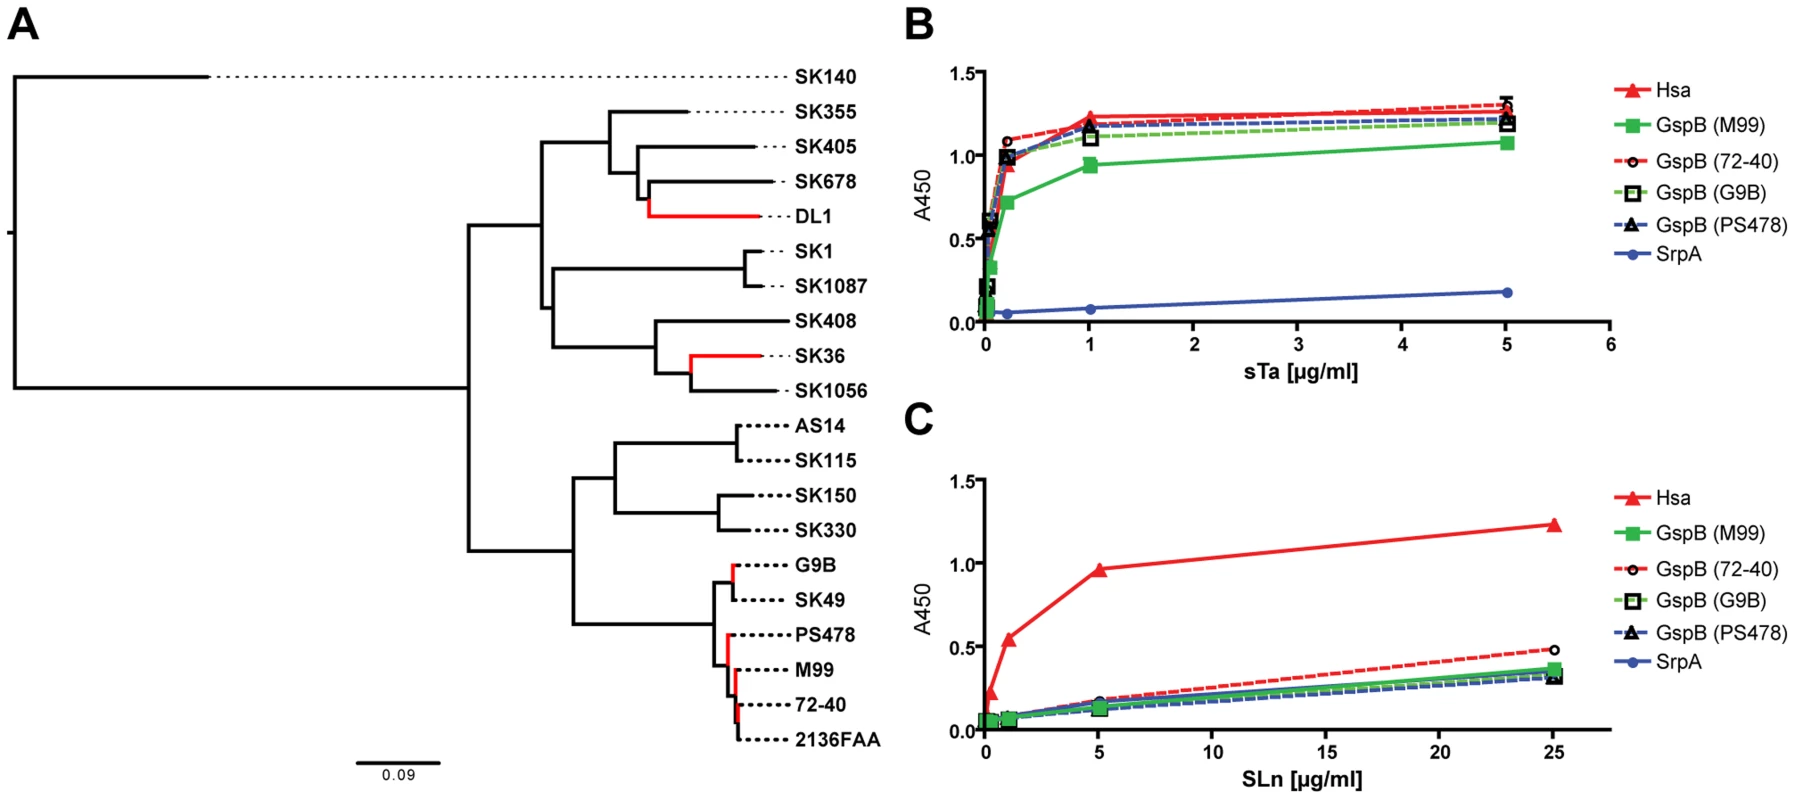 Phylogeny of SRR glycoprotein BRs from a representative number of <i>S. sanguinis</i> and <i>S. gordonii</i> strains, and glycan binding to immobilized adhesin-BRs.